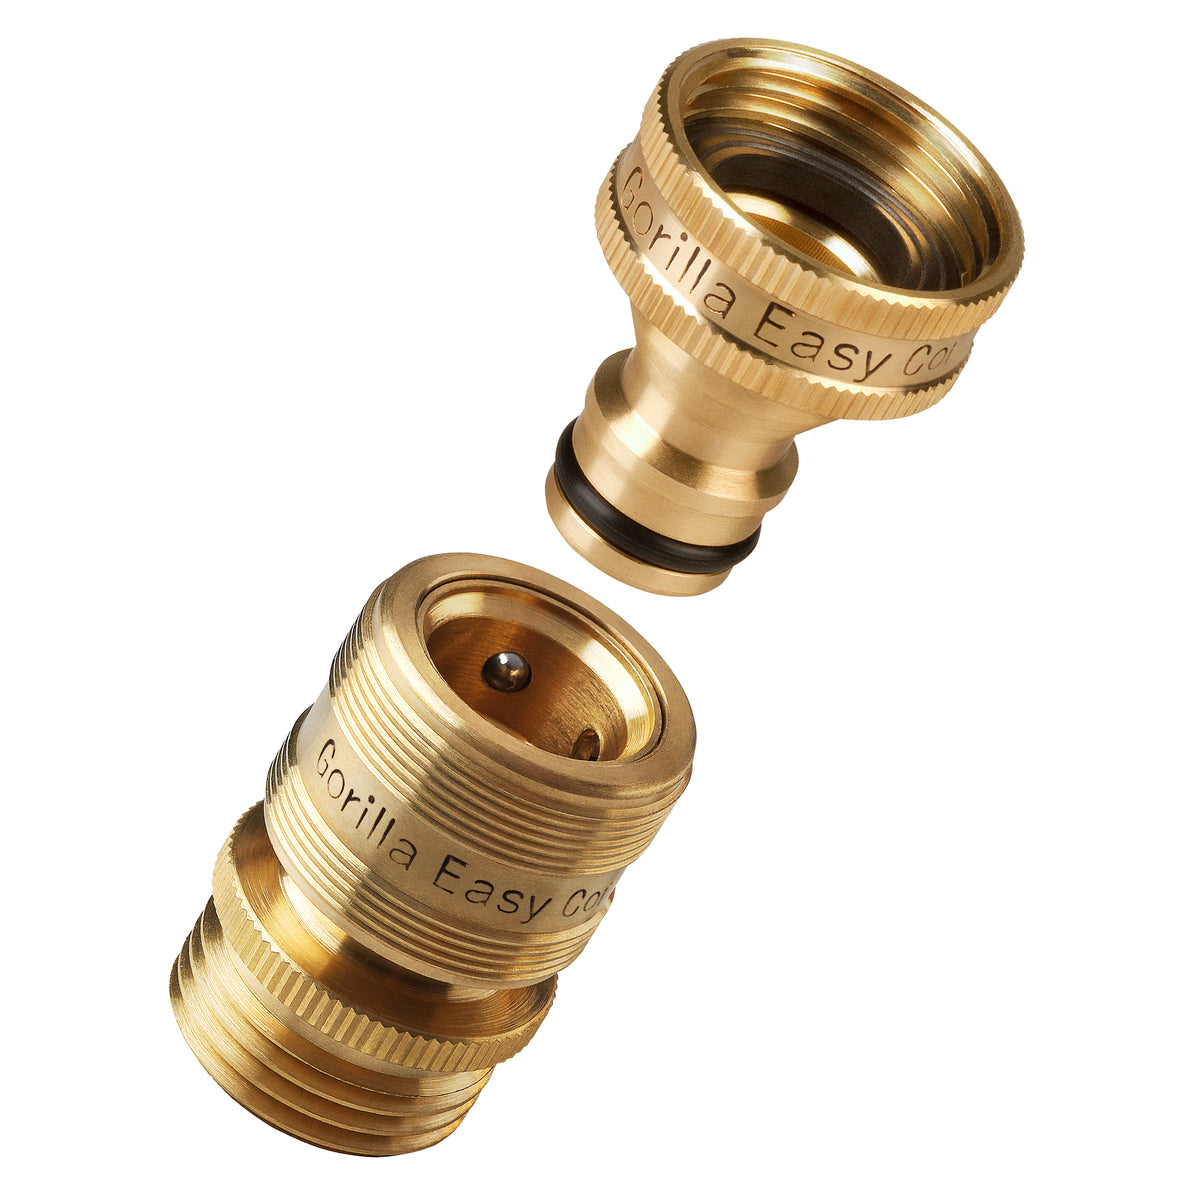 Gorilla Easy Connect Locking Garden Hose Quick Connect Fittings. ¾ inch GHT Solid Brass. (1)